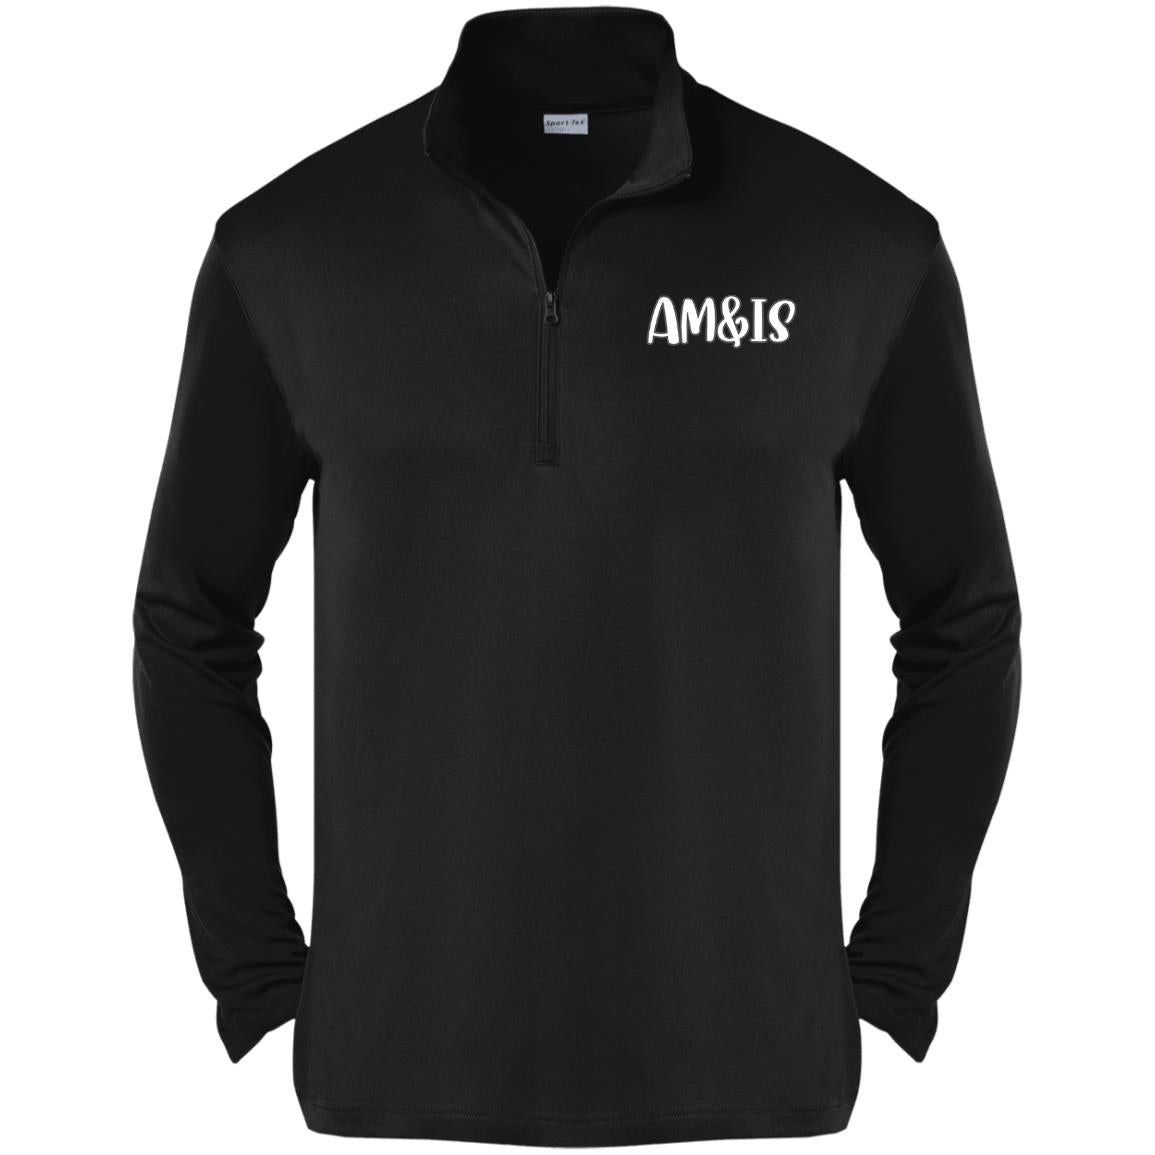 BLACK - AM&IS Activewear 1/4-Zip Pullover - mens shirt at TFC&H Co.